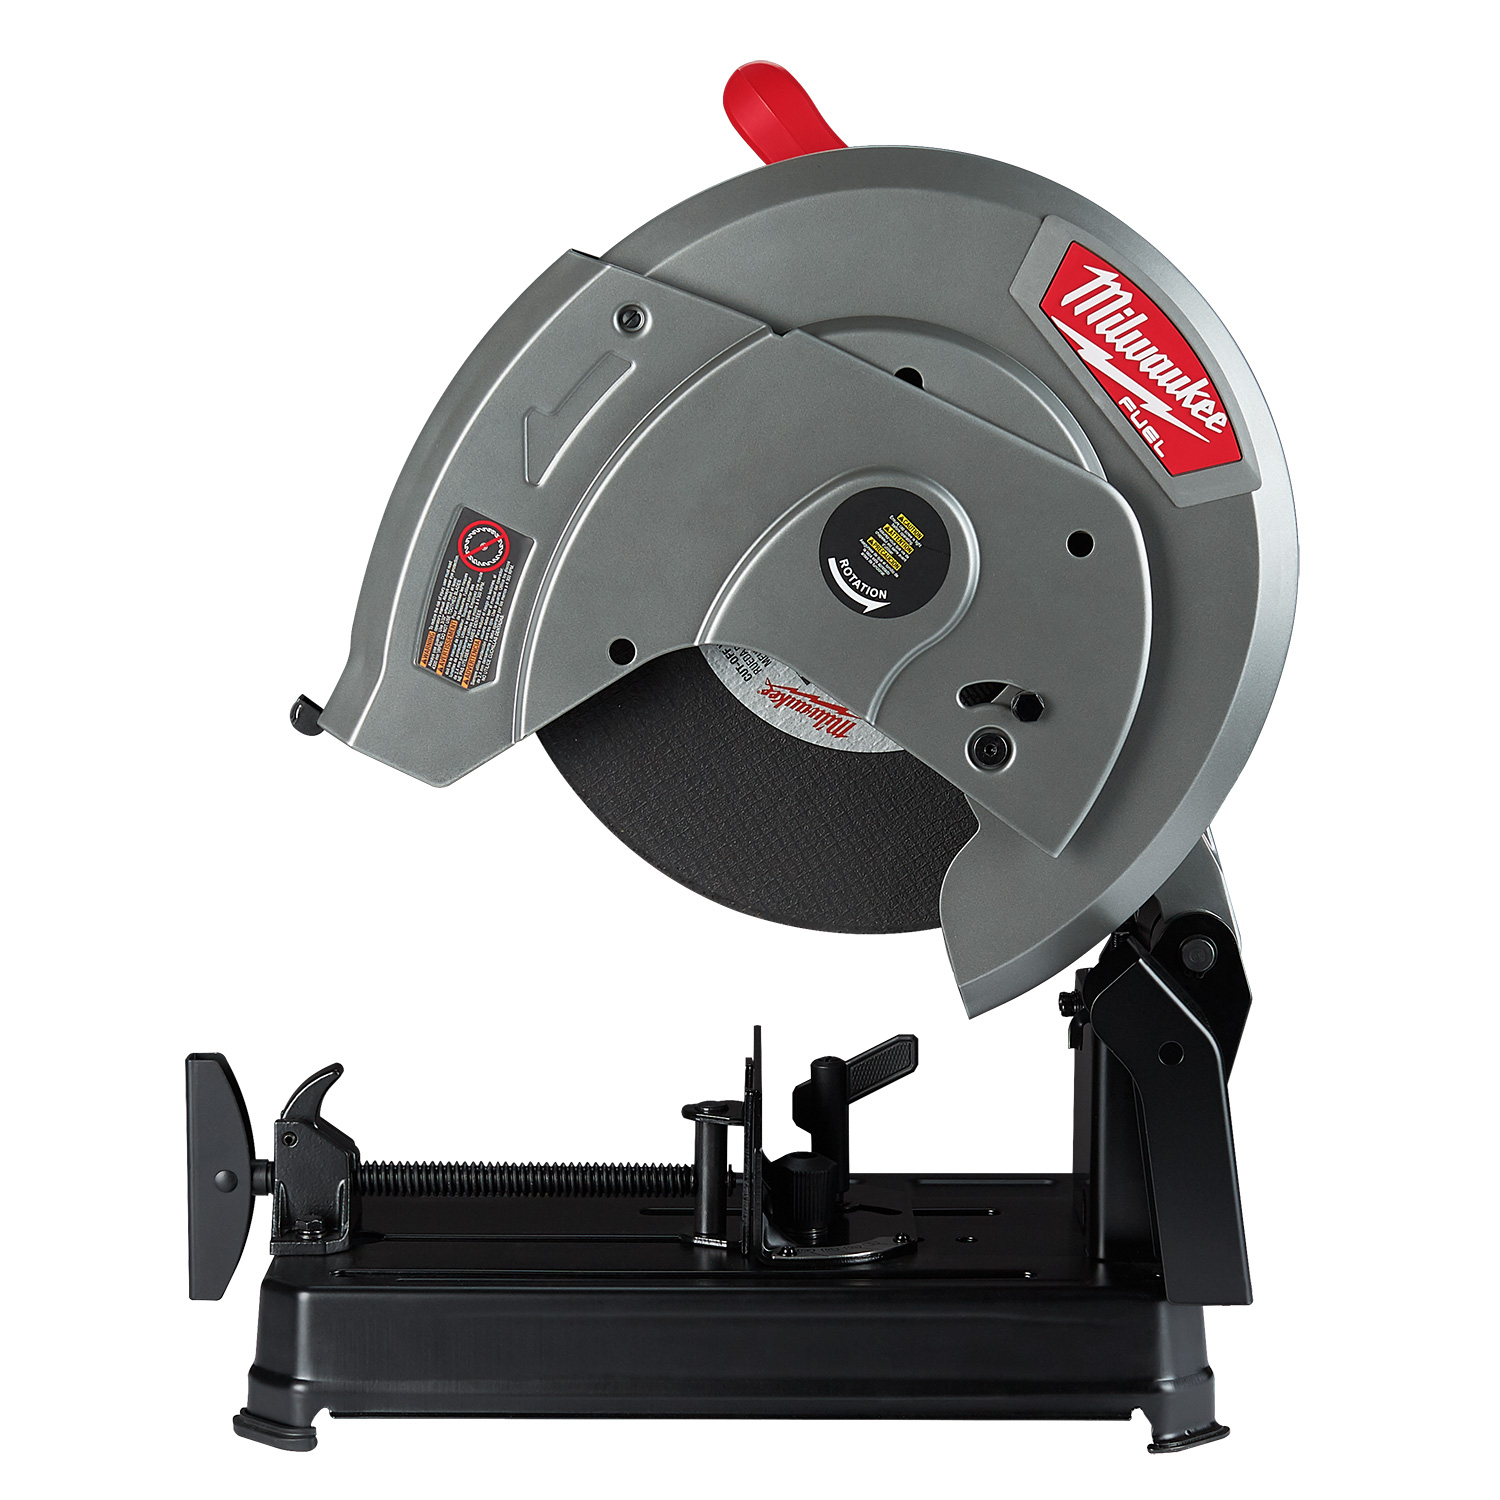 Milwaukee 18V Fuel 355mm (14") Abrasive Chop Saw (Tool Only) M18CHS355-0